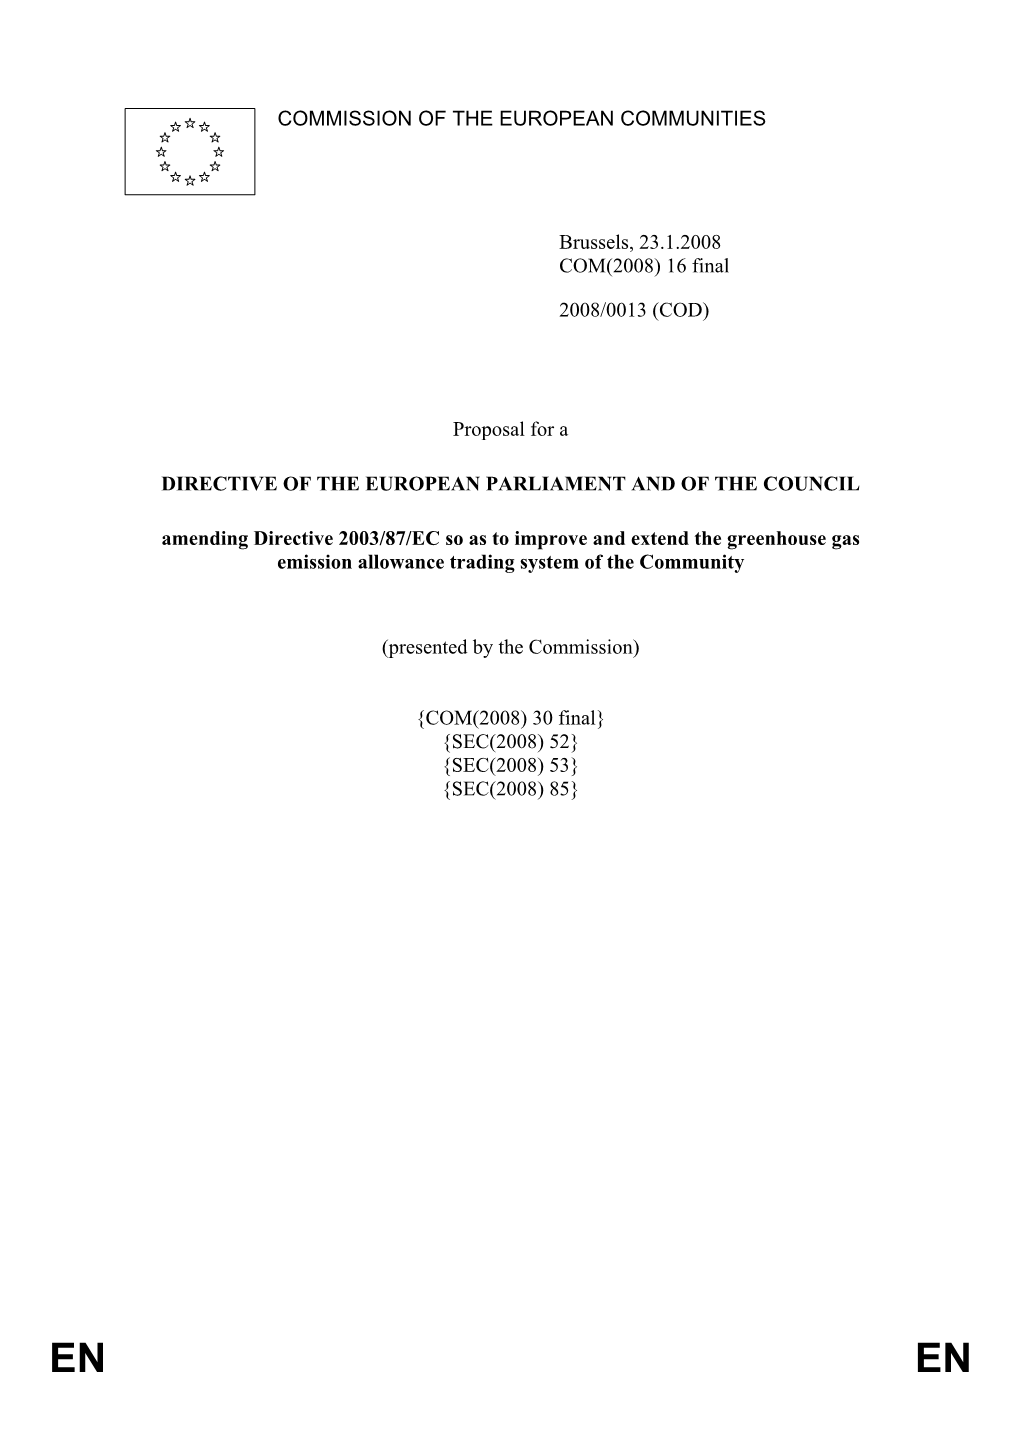 16 Final 2008/0013 (COD) Proposal for a DIRECTIVE of the EU